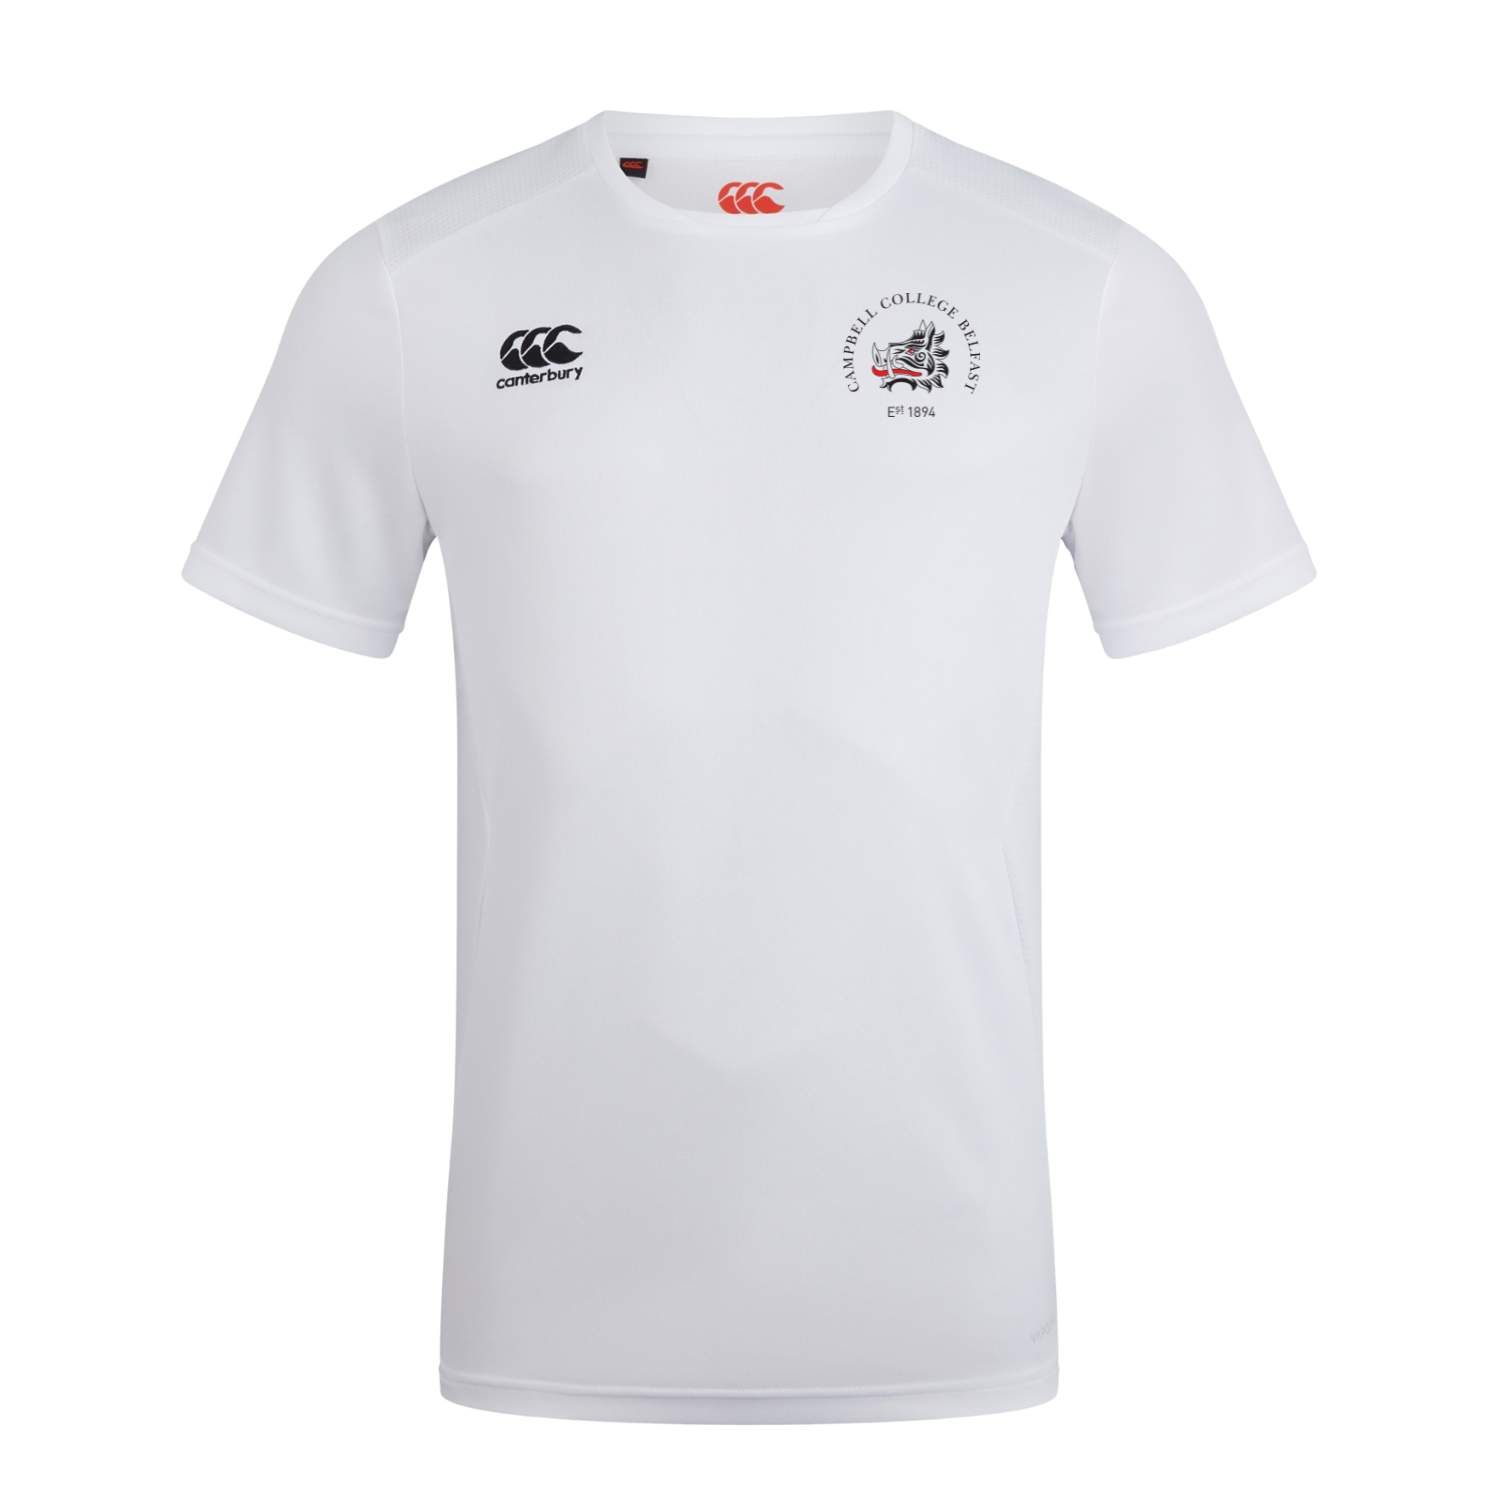 Campbell College - Club Dry Tee - White